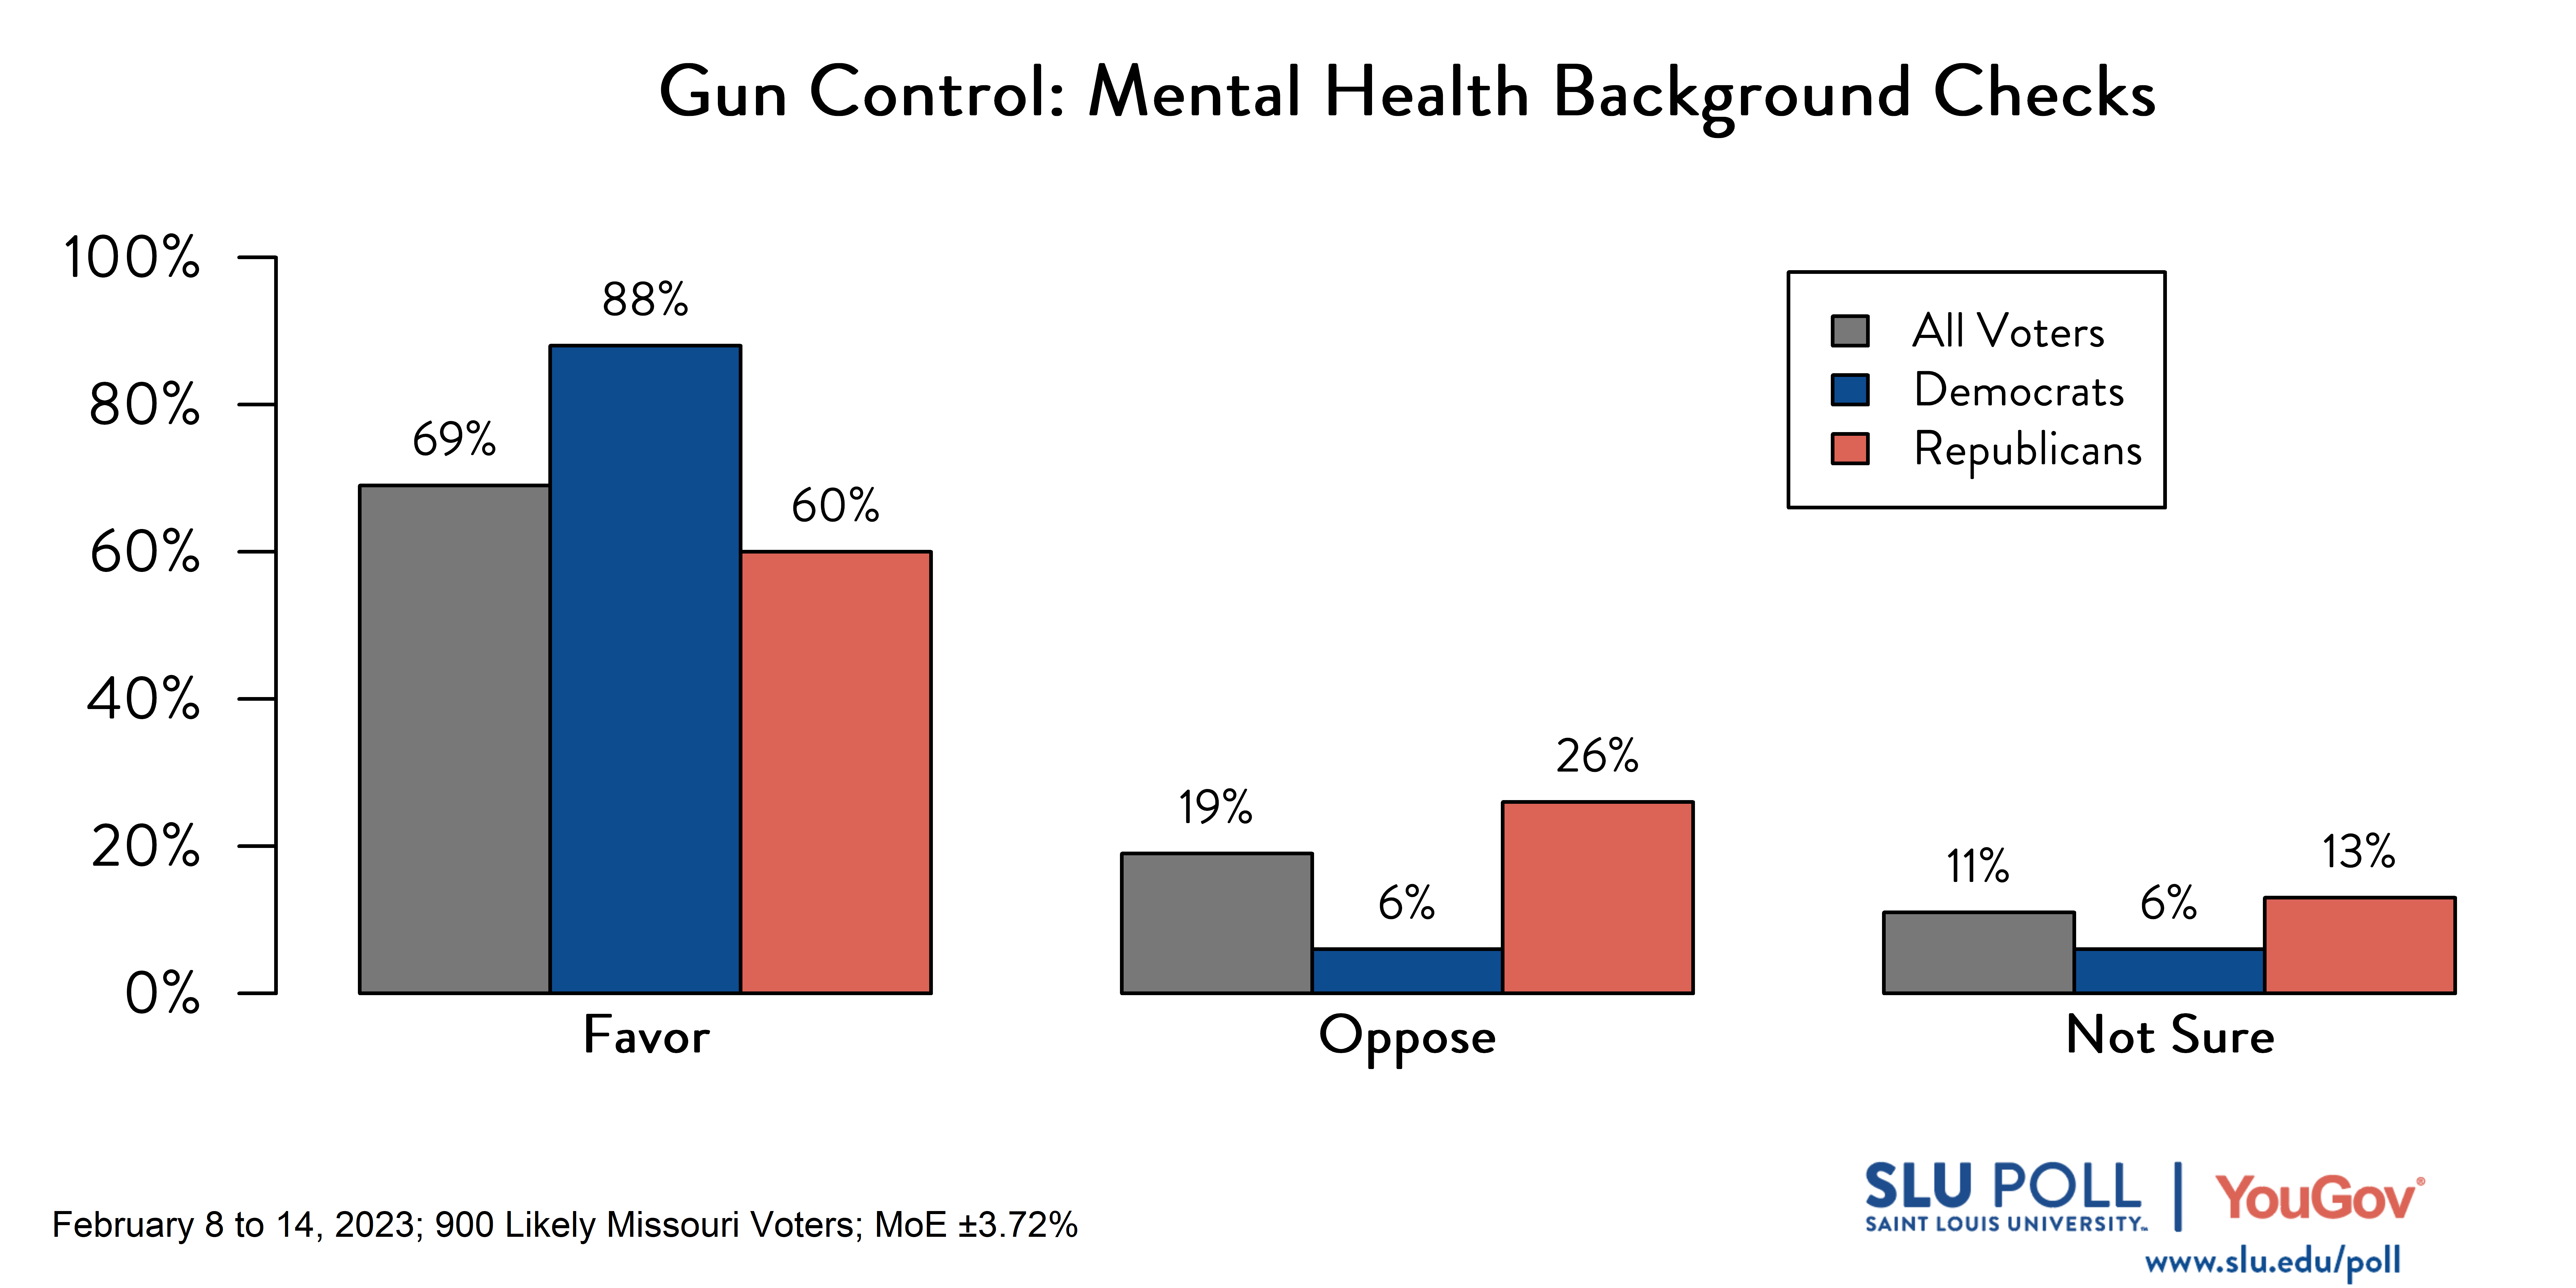 Likely voters' responses to 'Do you favor or oppose the following gun policies becoming law in Missouri: Requiring mental health background checks for all those buying guns, including at gun shows and private sales?': 69% Favor, 19% Oppose, and 11% Not sure. Democratic voters' responses: ' 88% Favor, 6% Oppose, and 6% Not sure. Republican voters' responses: 60% Favor, 26% Oppose, and 13% Not sure.